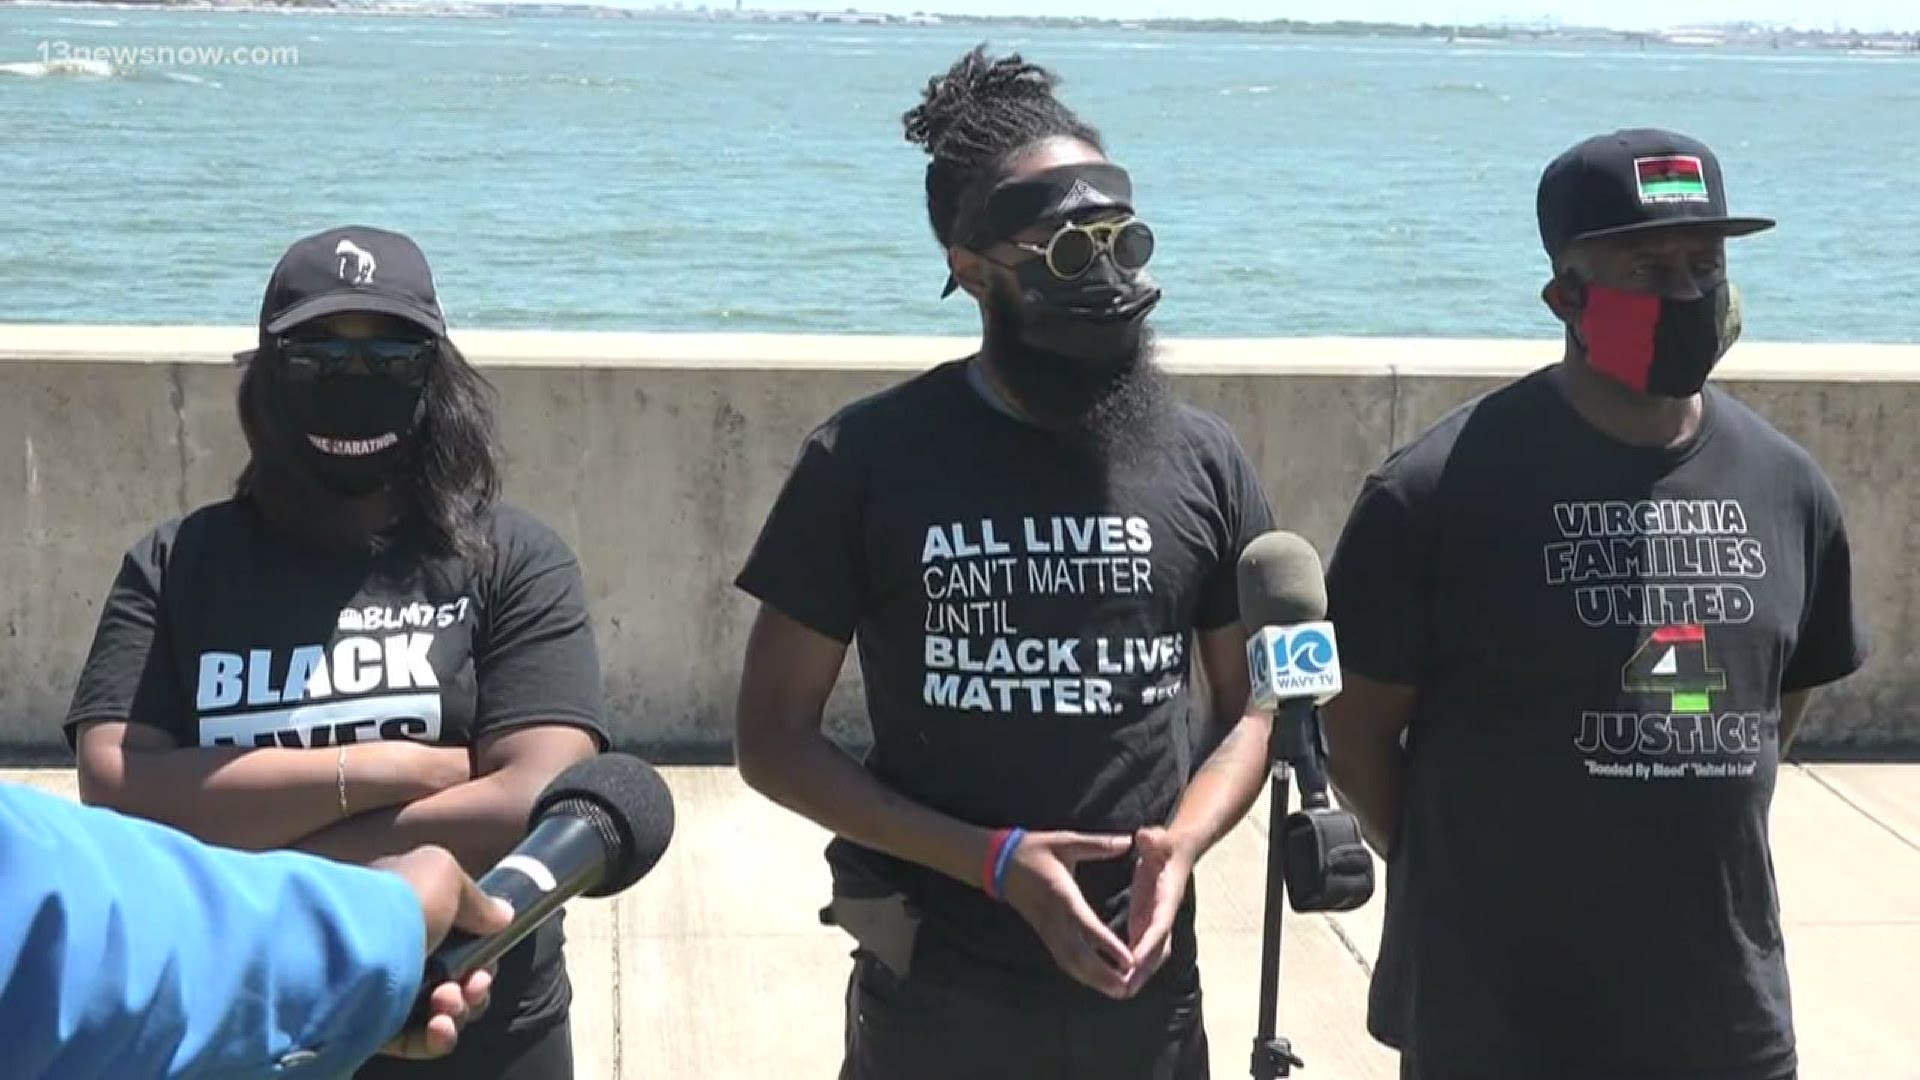 The organizer of the protest in Virginia Beach said Sunday night's chaos was not the fault of Black Lives Matter 757.